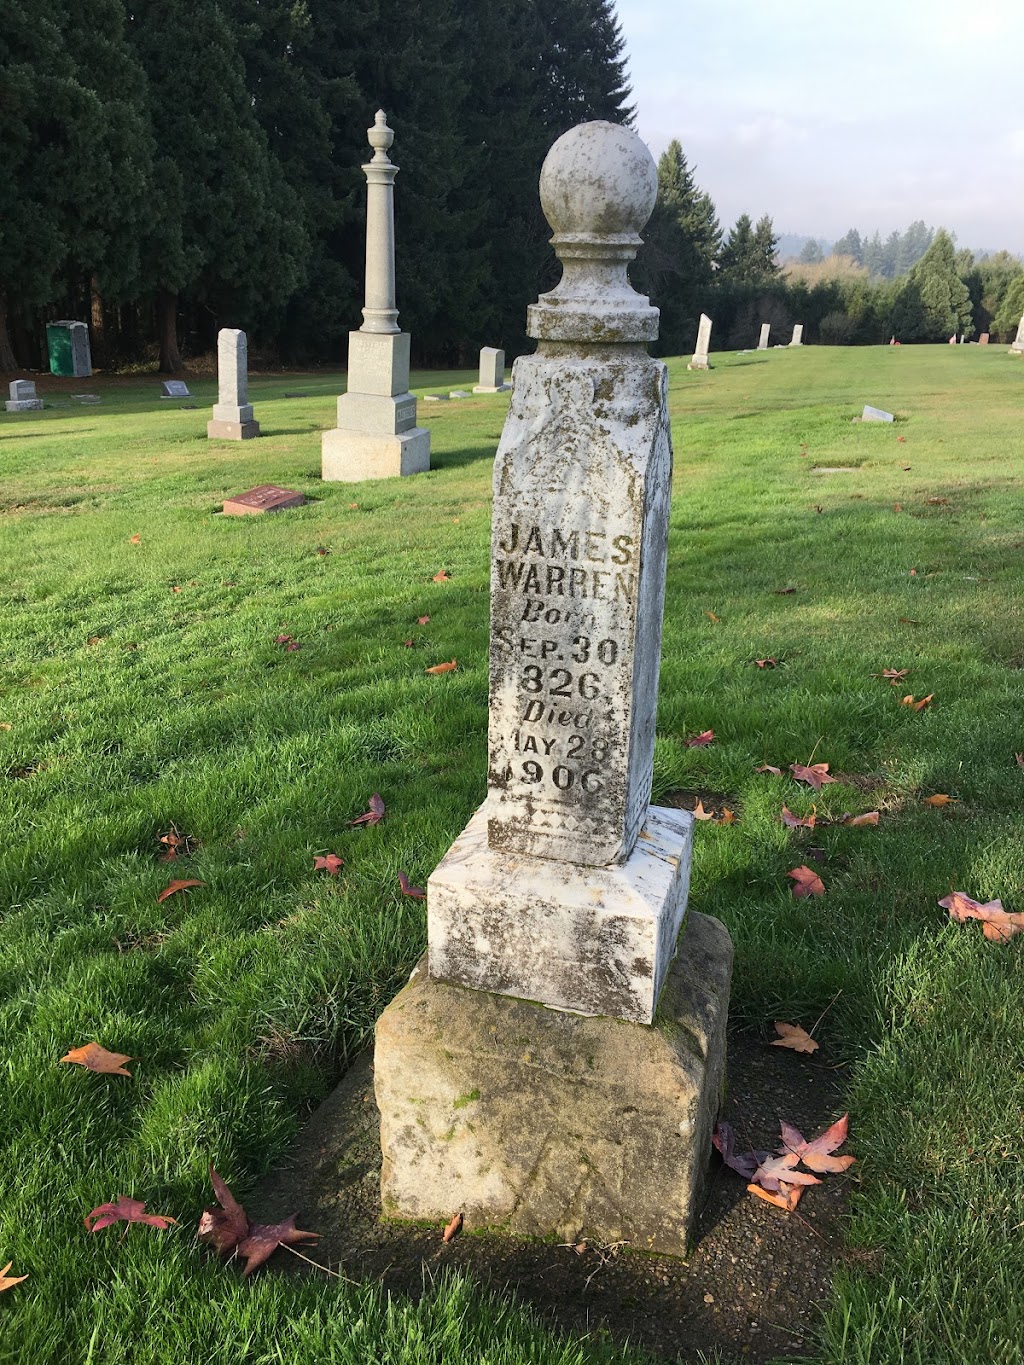 Mount Olive Cemetery Association Of Laurel Oregon | 15445 SW Campbell Rd, Hillsboro, OR 97123, USA | Phone: (503) 628-2402